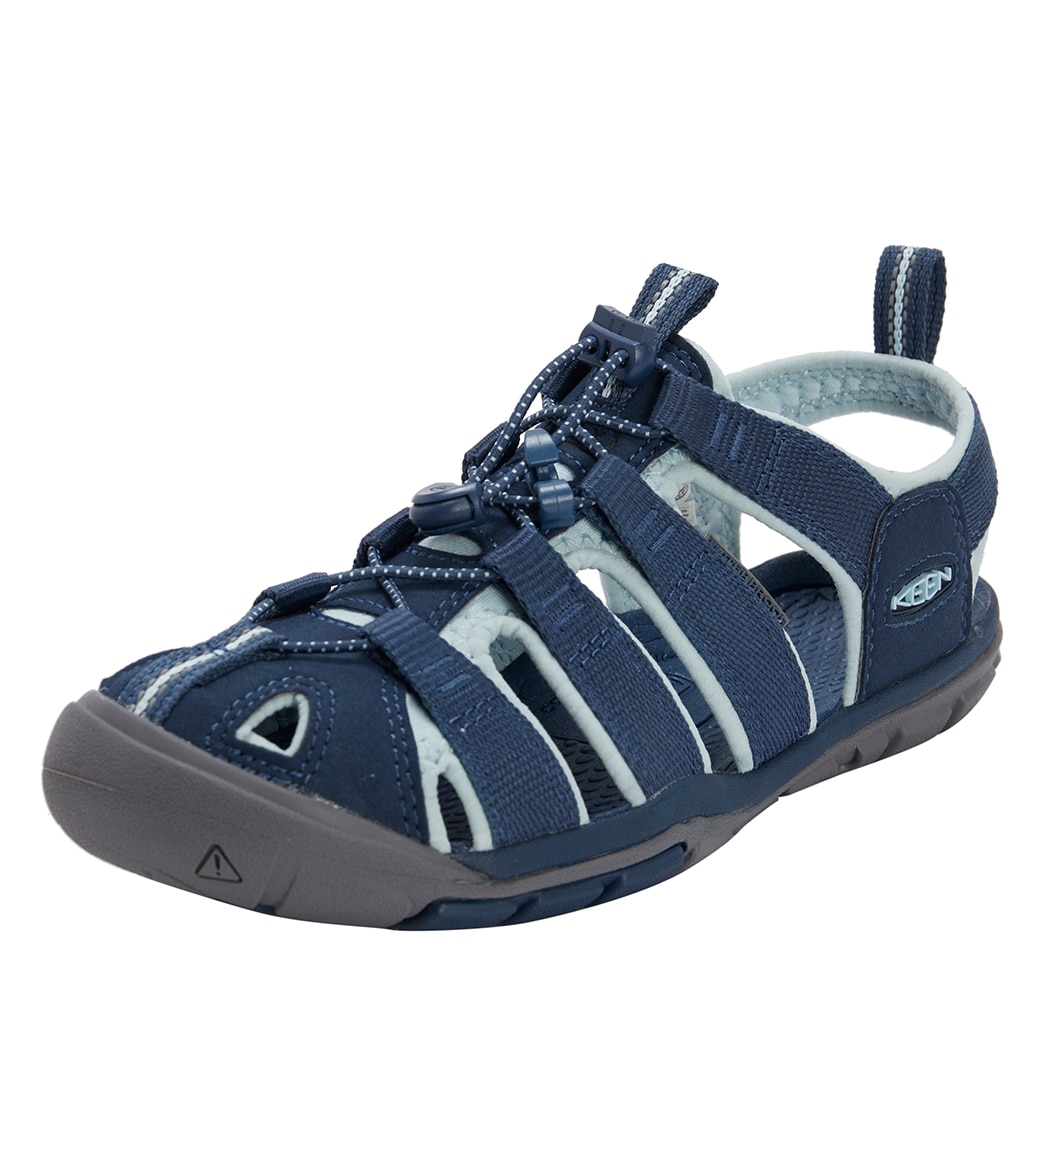 Keen Women's Clearwater Cnx Water Shoes - Navy/Blue Glow 7 - Swimoutlet.com